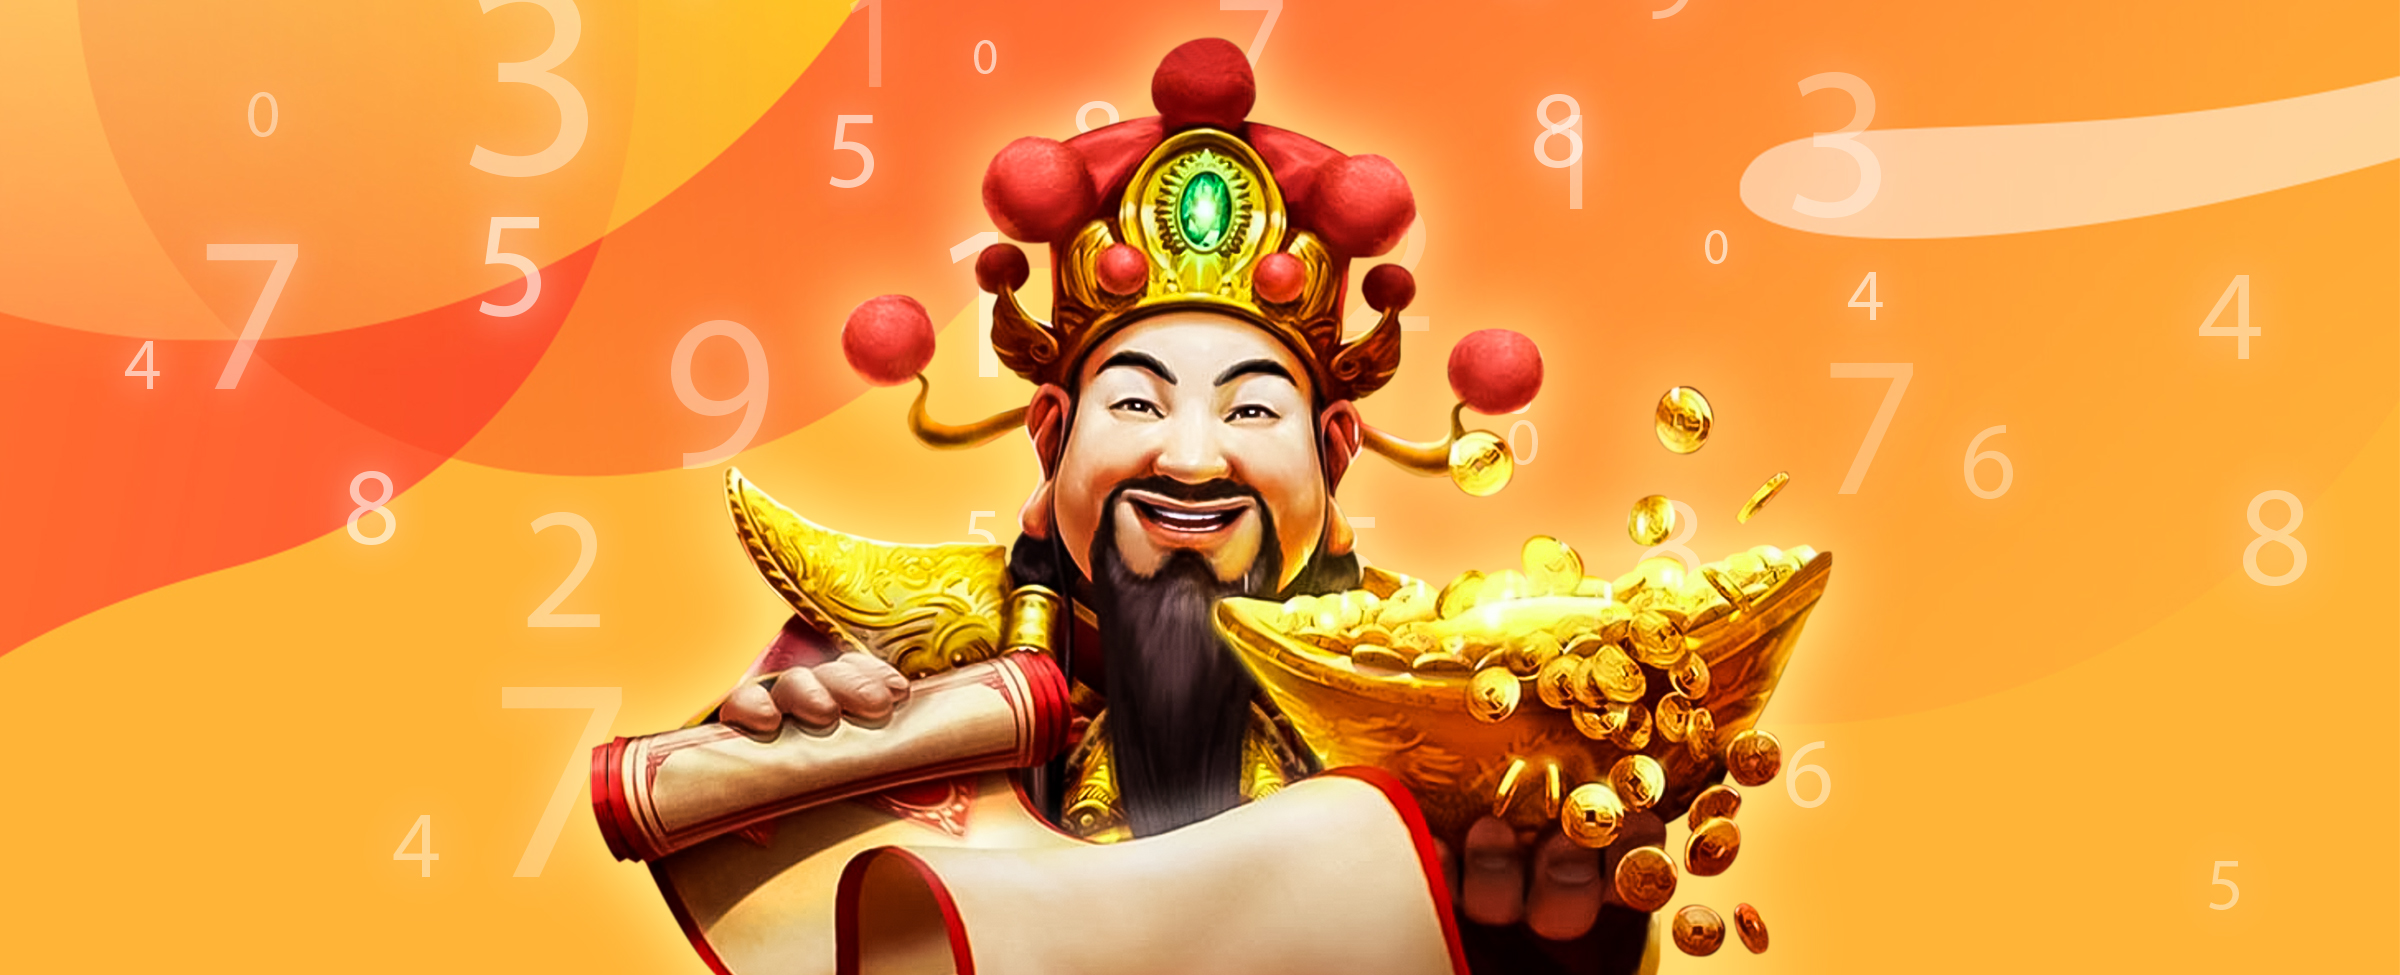 An animated cartoon Caishen appears from the waist up, wearing a robe with large textured golden shoulder pads, and a red head piece with a gold and green emblem. In one hand he holds a gold pot with gold coins, while in the other, an unrolled scroll with red edges. Surrounding him are numbers of various sizes, and behind, an orange multi-toned abstract background.